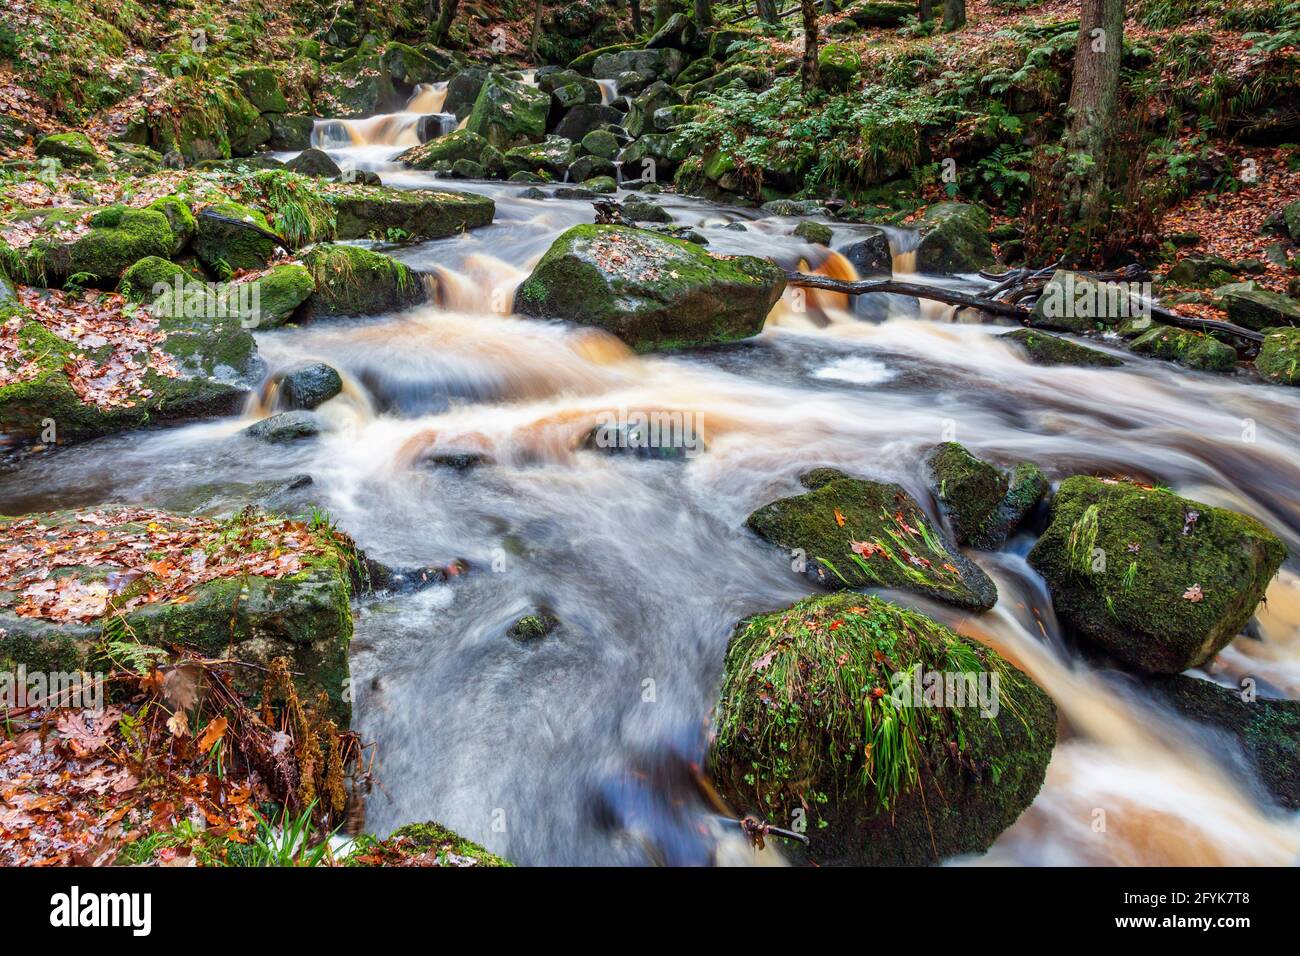 Autumn at one of the many waterfalls on Burbage Brook in the wonderful Padley Gorge, Peak District National Park, Derbyshire. Stock Photo